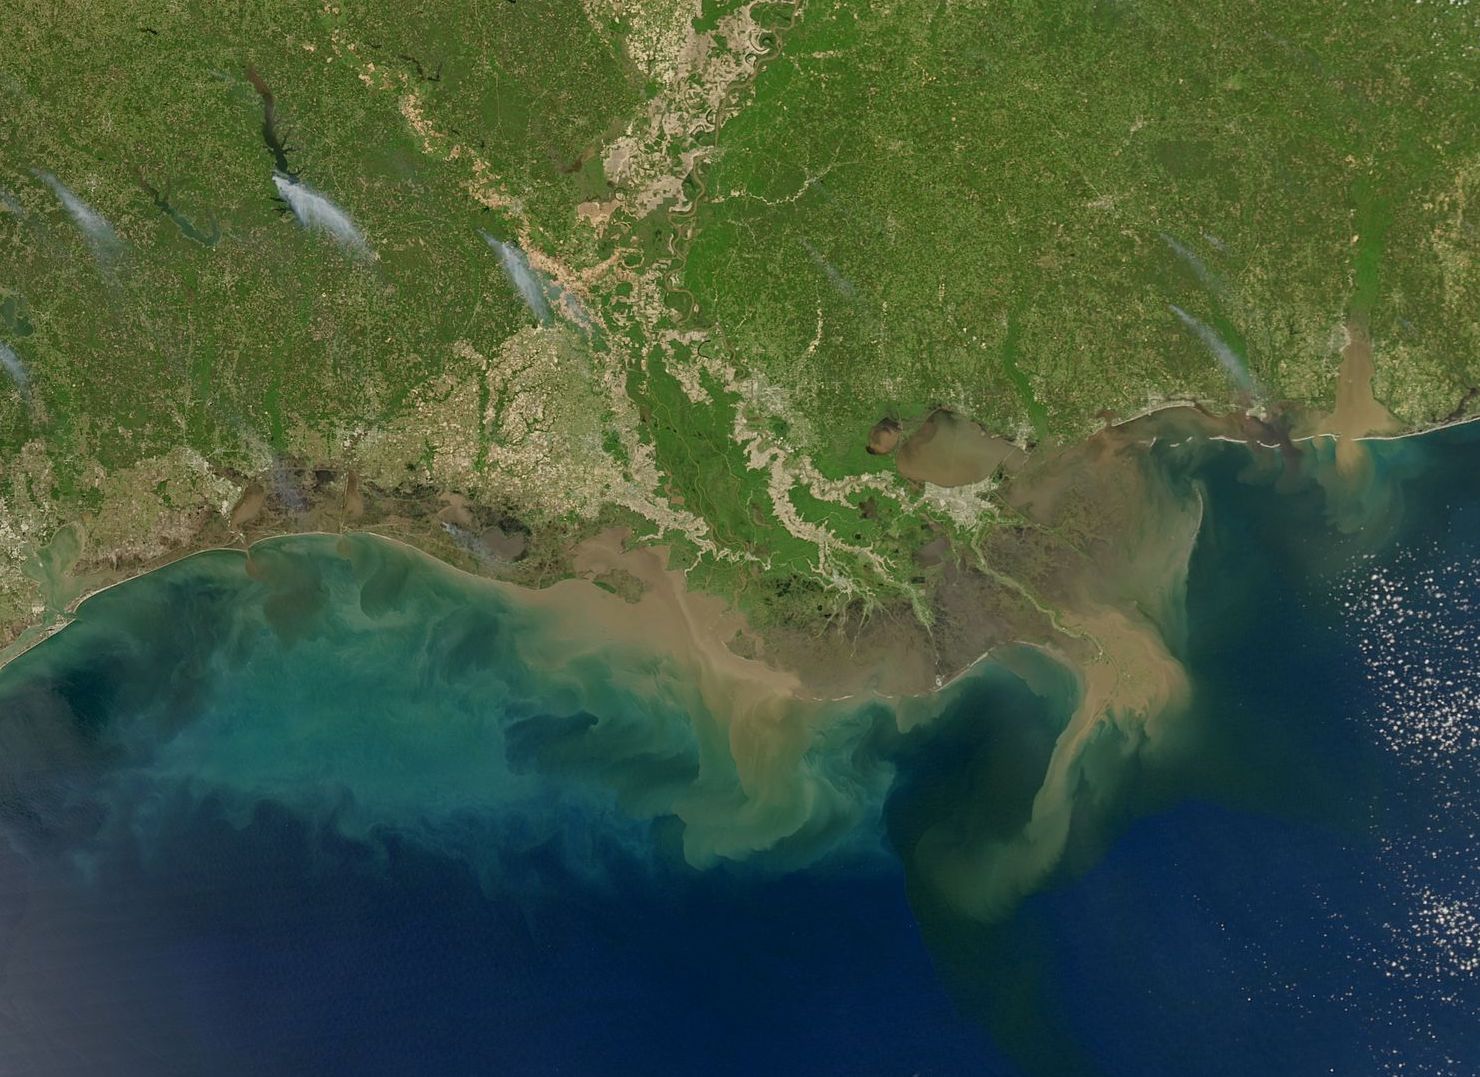 A satellite image of the Gulf of Mexico showing sediment building up in the water around the mouths of the Mississippi and Atchafayala rivers.